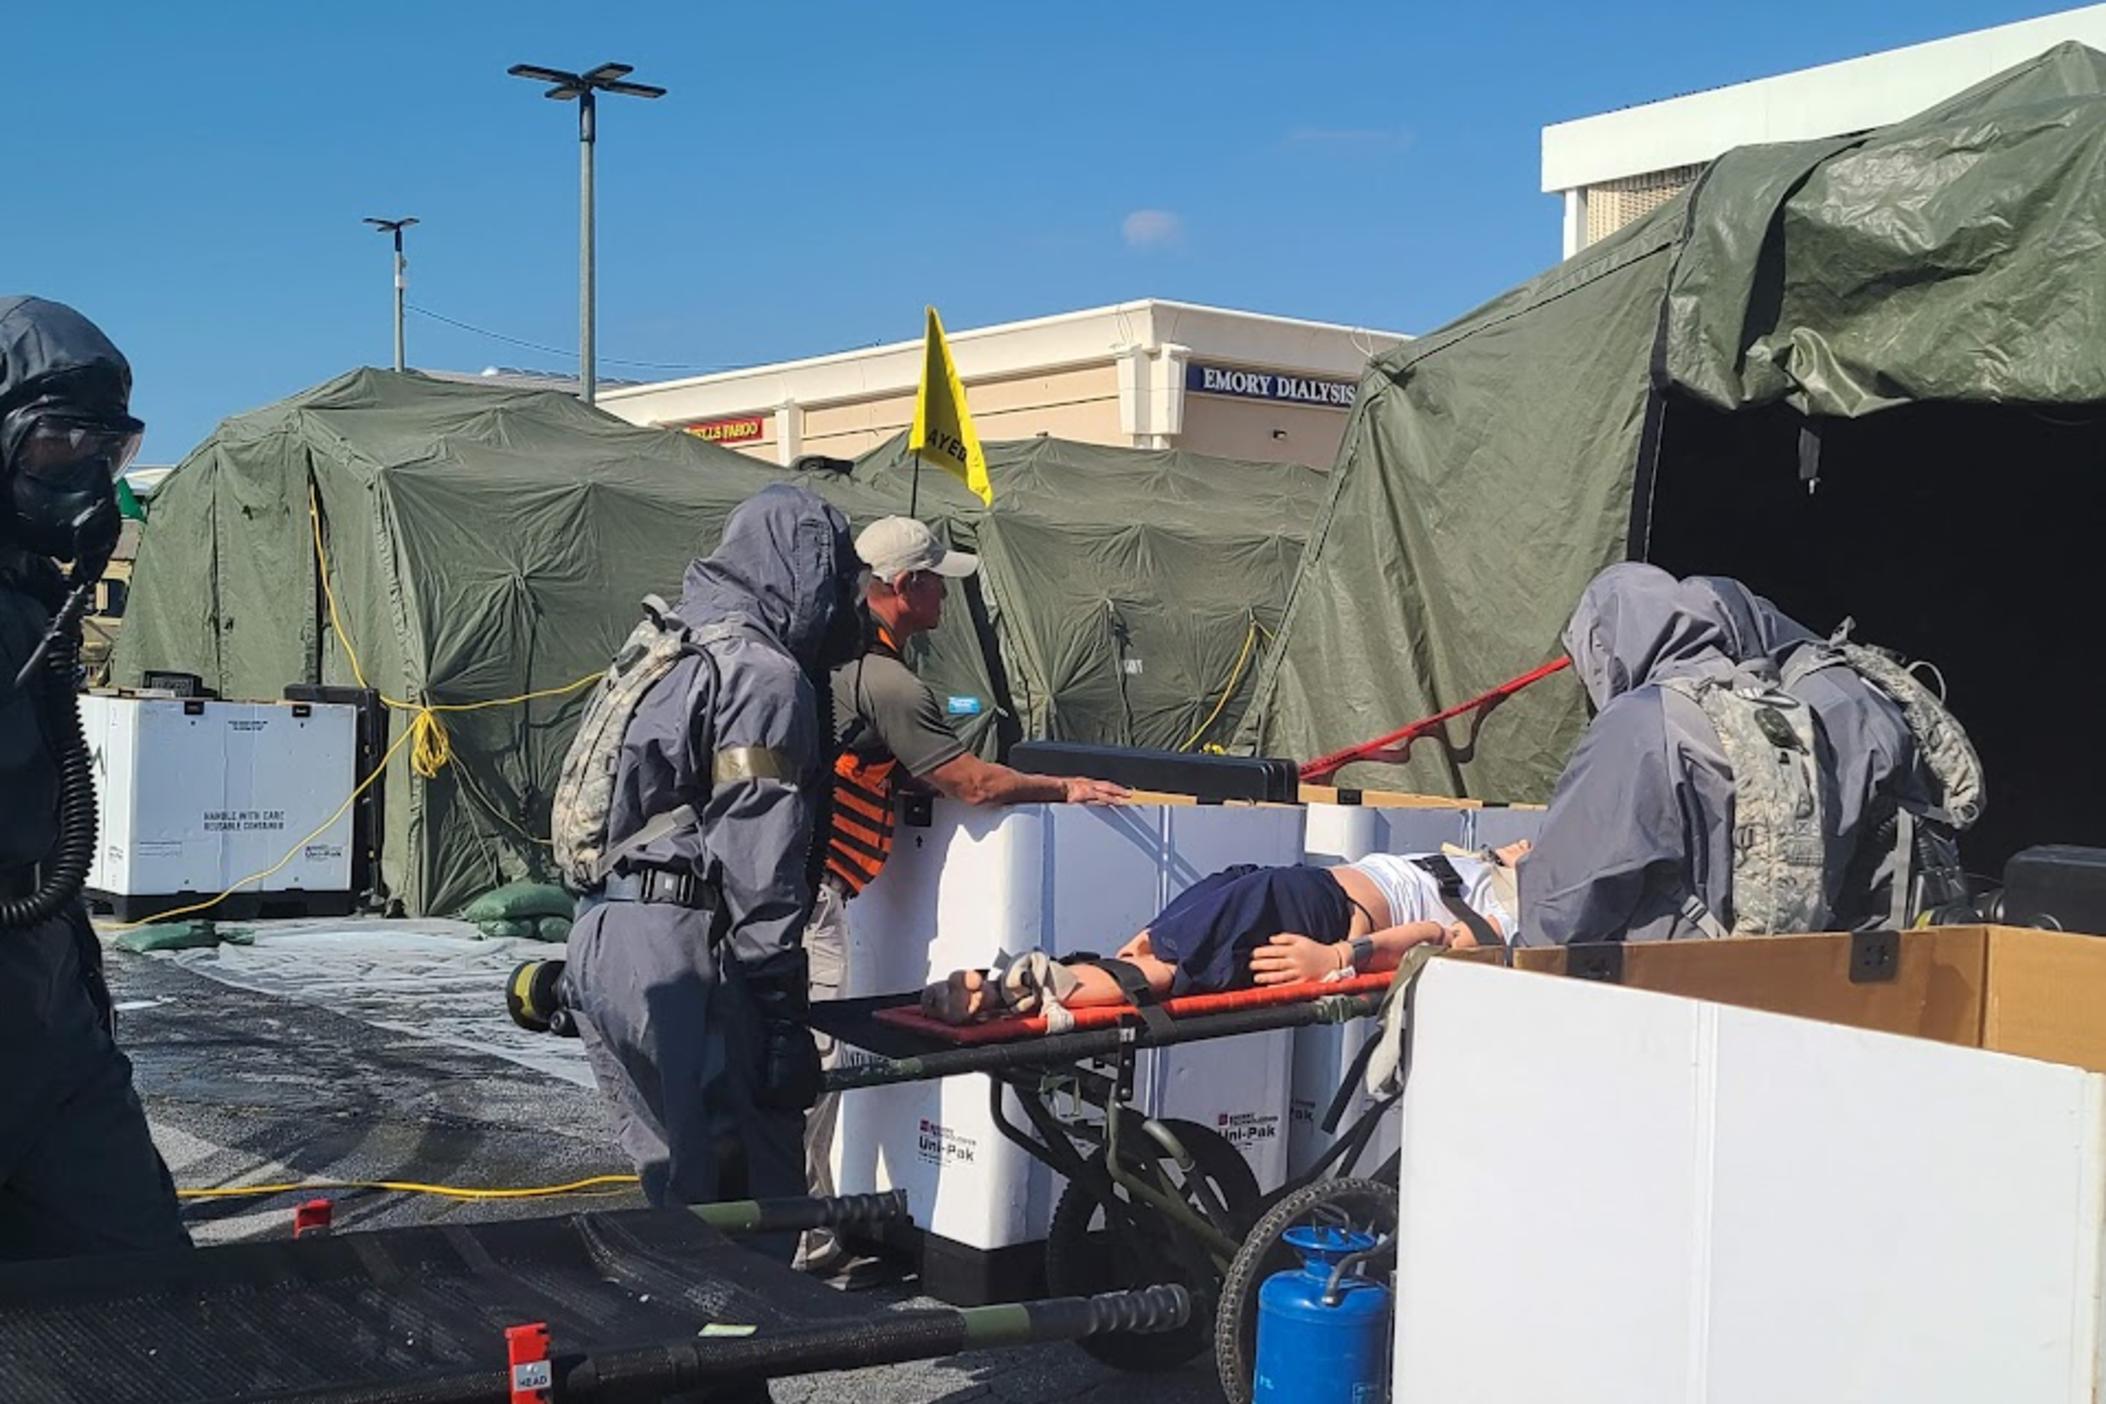 Military members and first responders learn how to decontaminate people and animals in the event of nuclear detonation at a training exercise November 4, 2022 in East Point, GA.